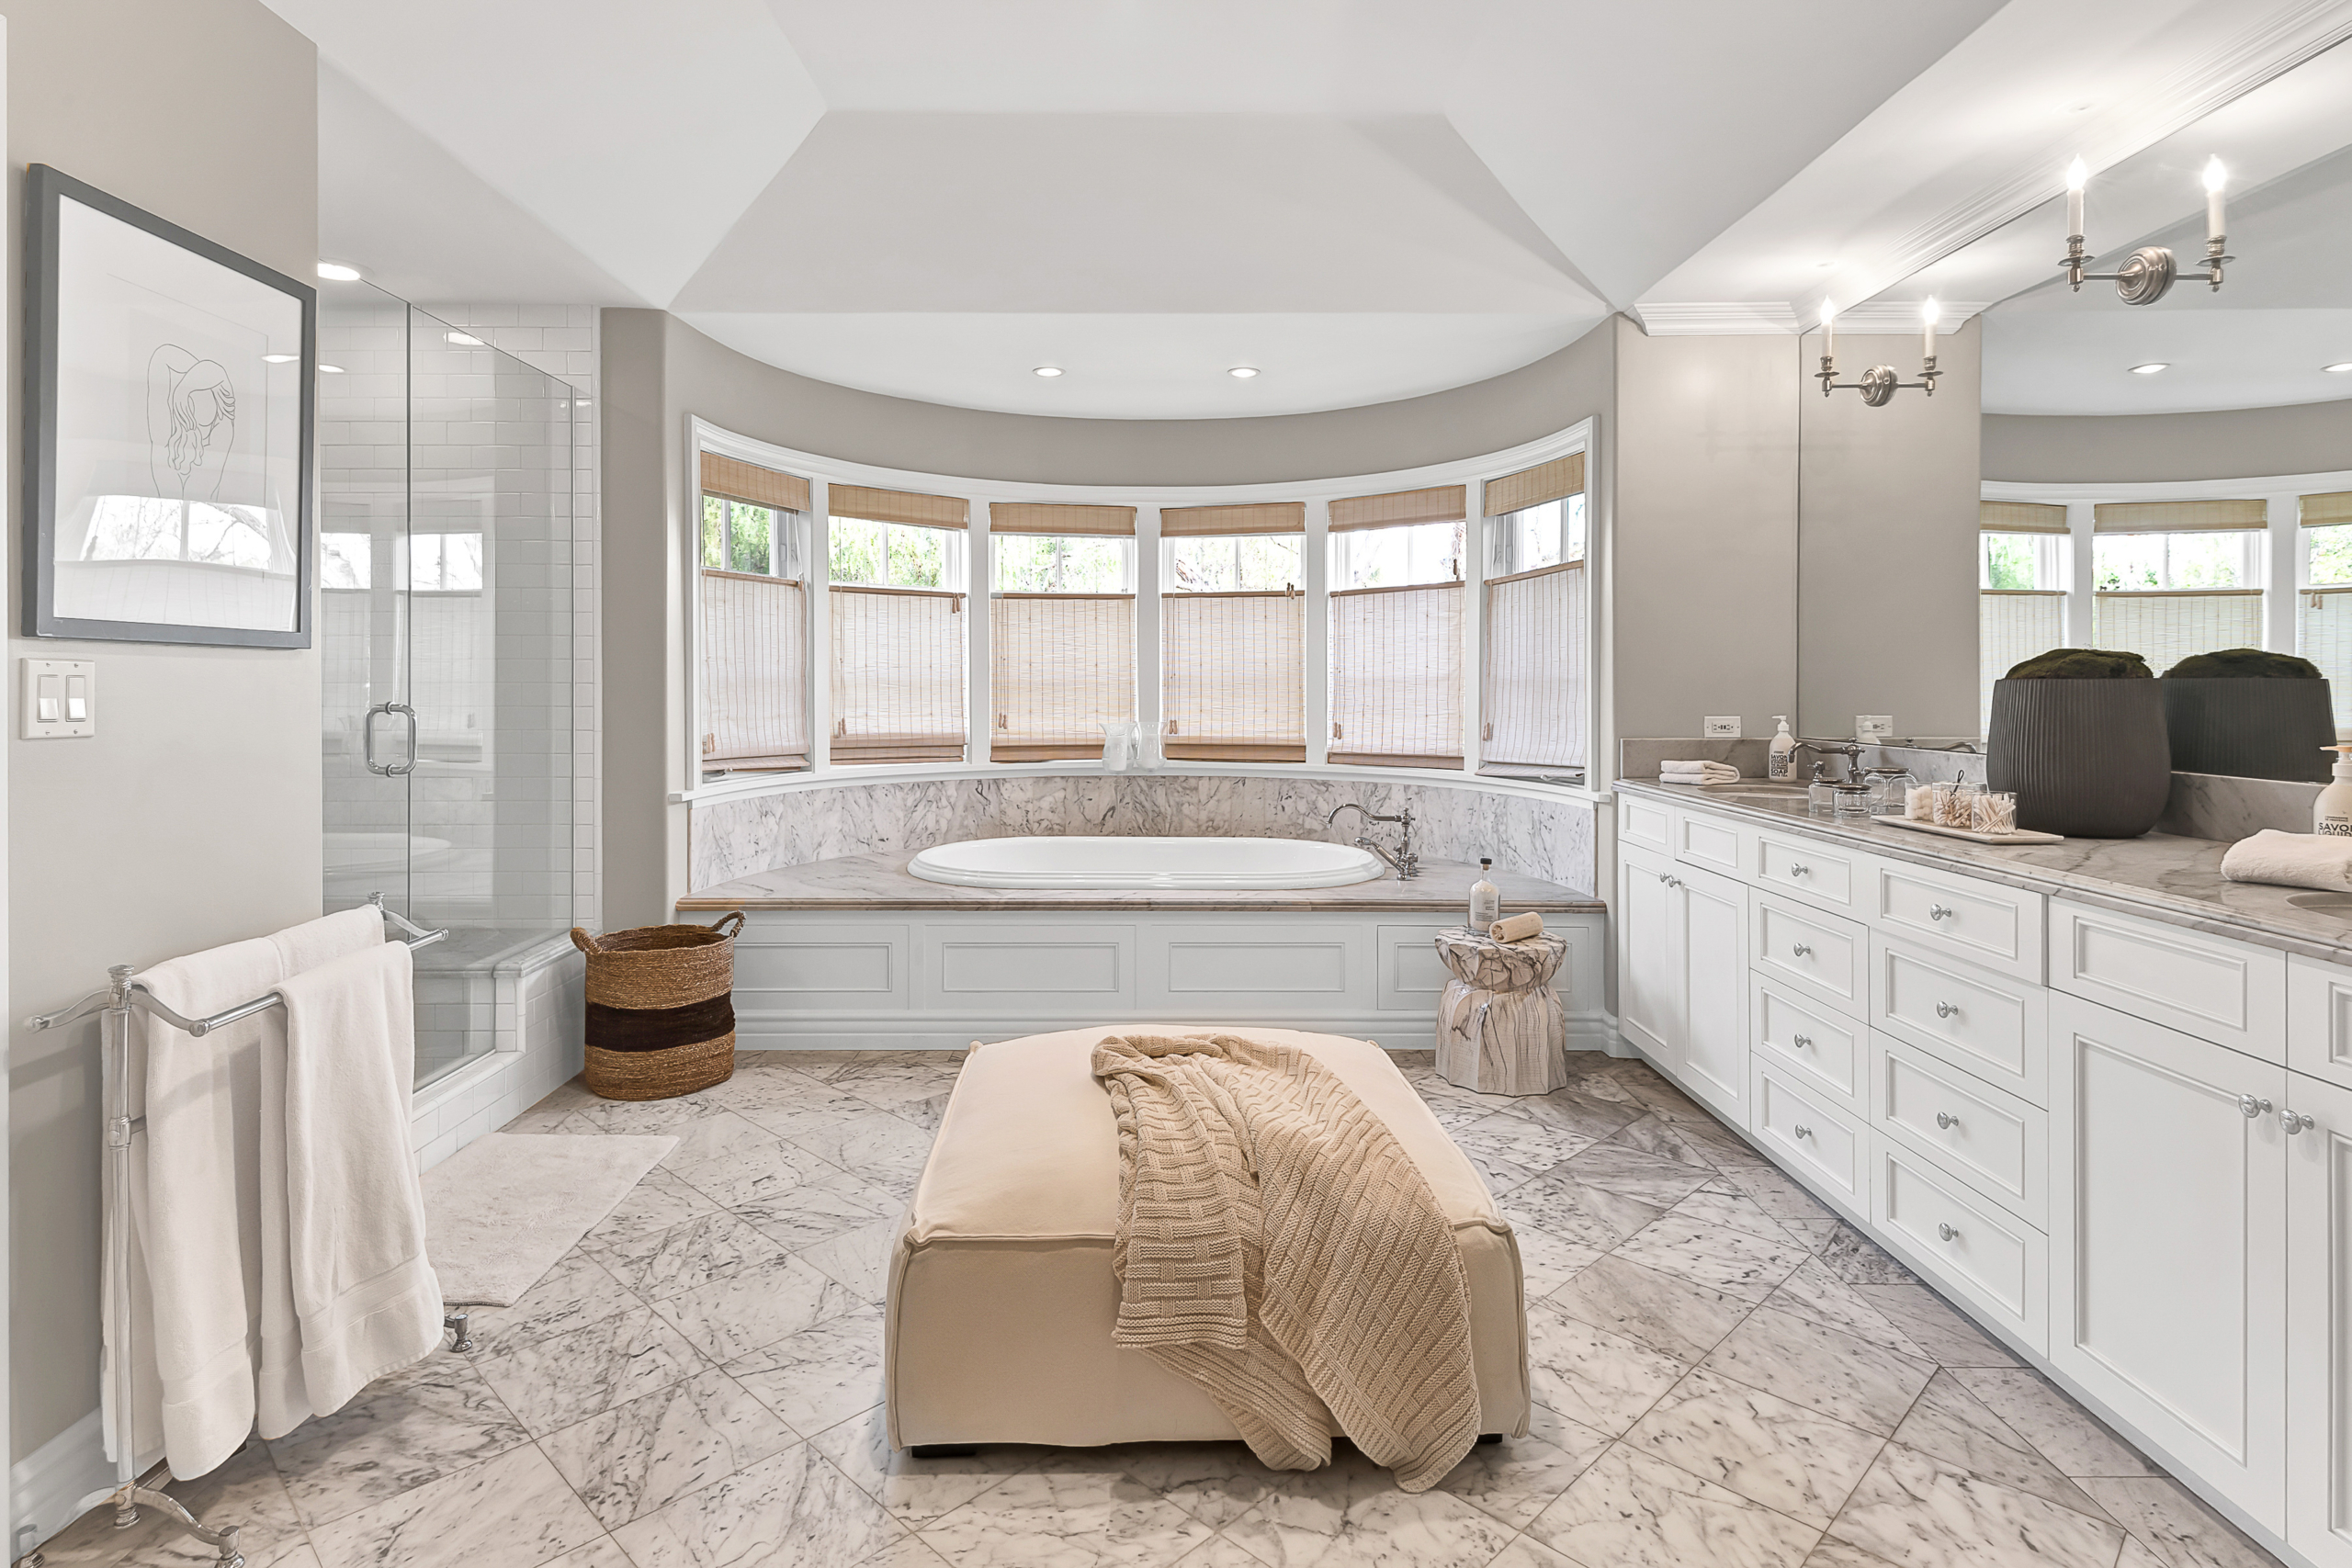 Highly sought-after Ken Ungar designed Quintessential Cape Cod in Brentwood CA. Bright white master bathroom with large soaker tub, separate glass, door shower and marble floors.